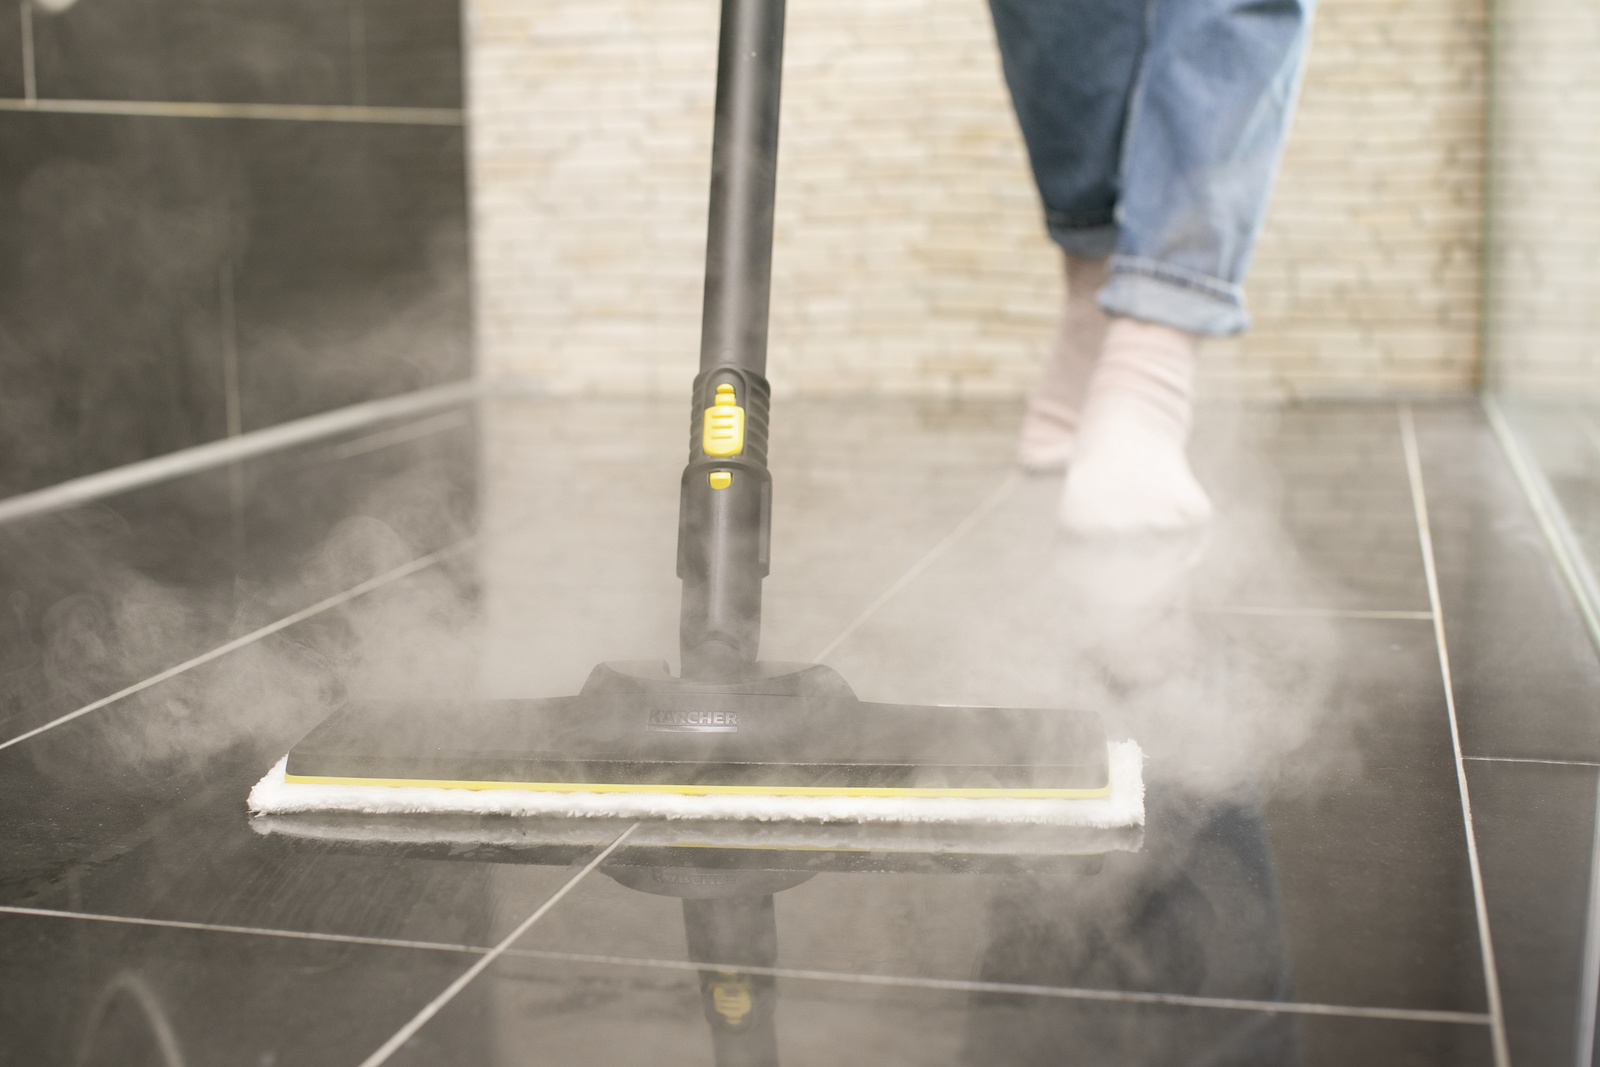 Karcher's New SC 3 Upright EasyFix Steam Mop Deep Cleans Without Chemicals  Quickly - NXT Malaysia